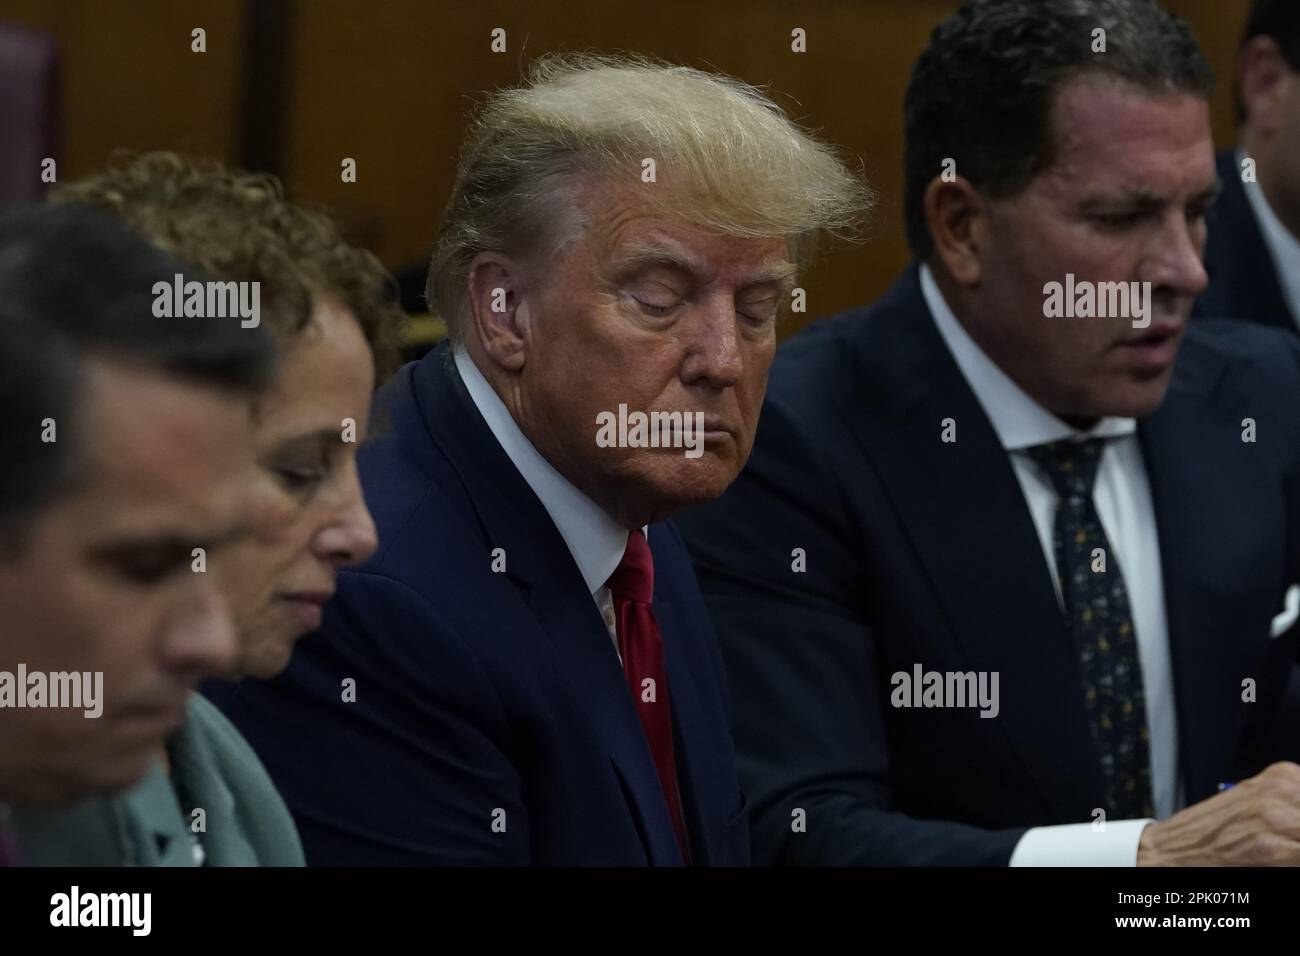 New York, USA. 04th Apr, 2023. Former US President Donald J. Trump appears in court before Judge Juan Merchan for his arraignment at the Manhattan Criminal Court on Tuesday, April 4, 2023, in New York. Trump pleaded not guilty to 34 felony counts related to hush money payments made to adult film star Stormy Daniels before the 2016 presidential election. (Photo by Timothy A. Clary/Pool/Sipa USA) Credit: Sipa USA/Alamy Live News Stock Photo